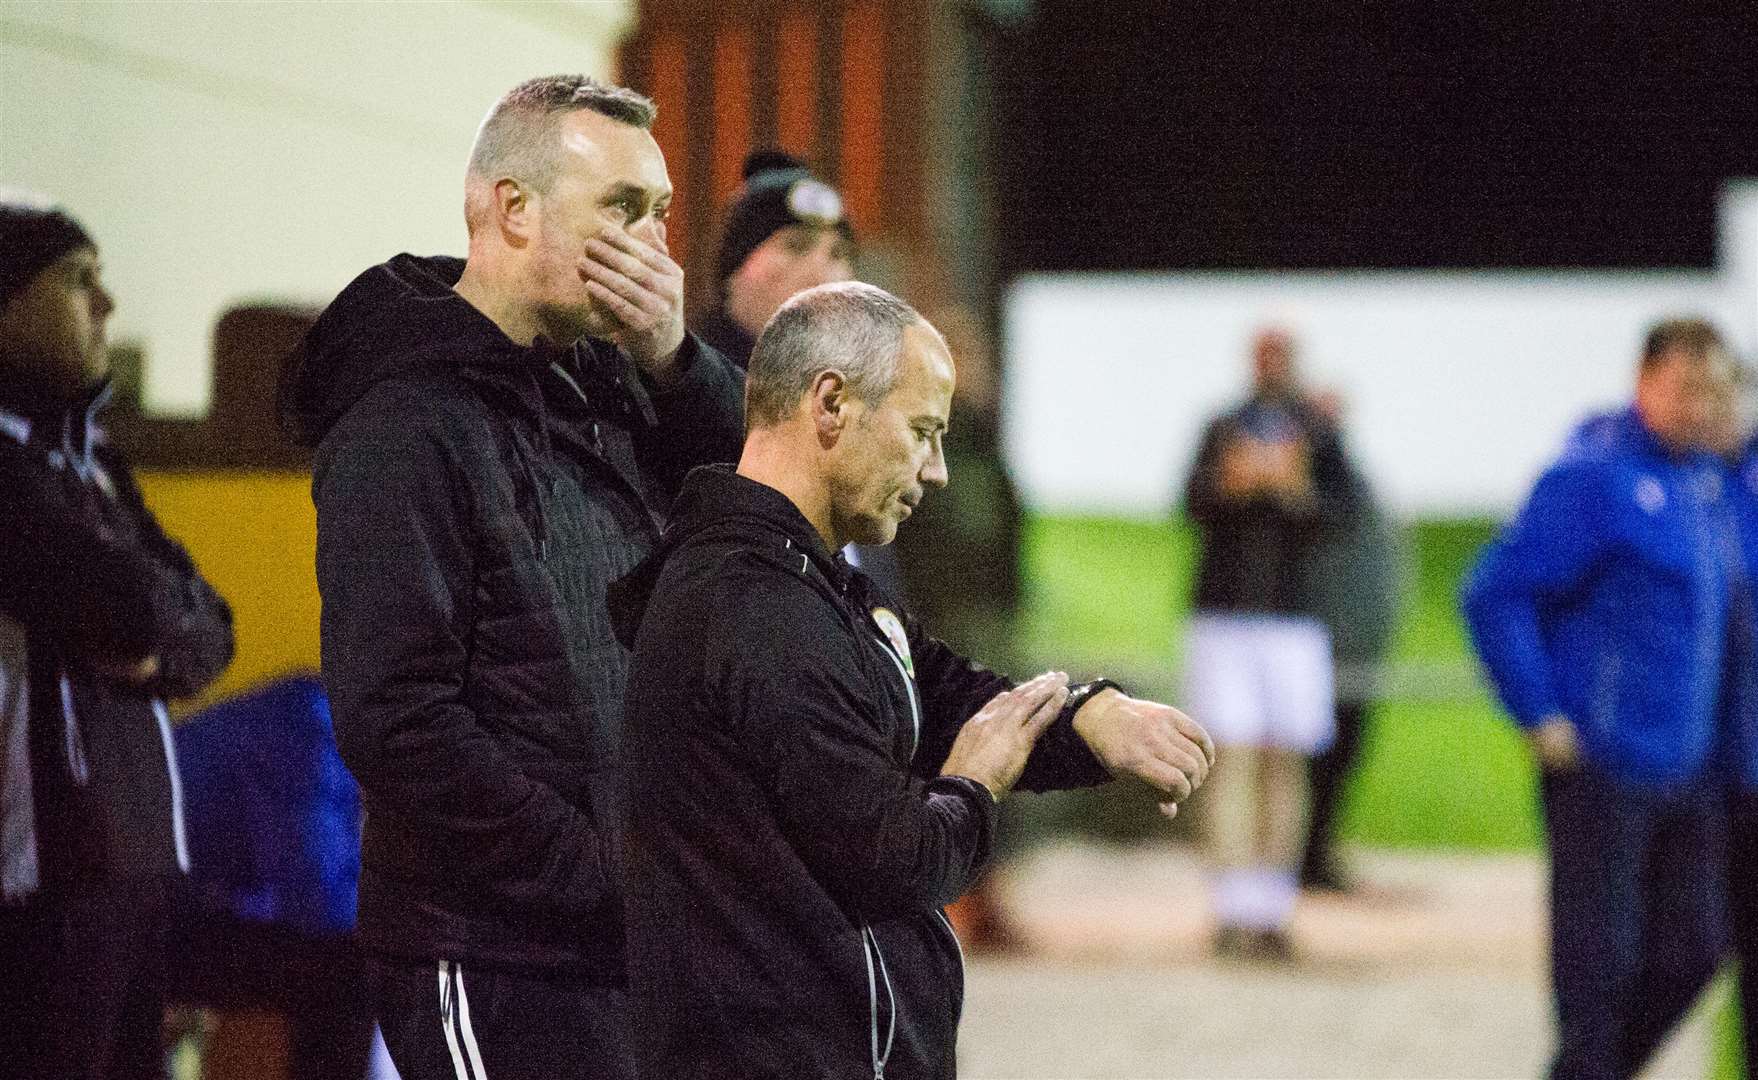 Gordon Connelly (checking watch) and assistant manager Steven Macdonald. Picture: Becky Saunderson